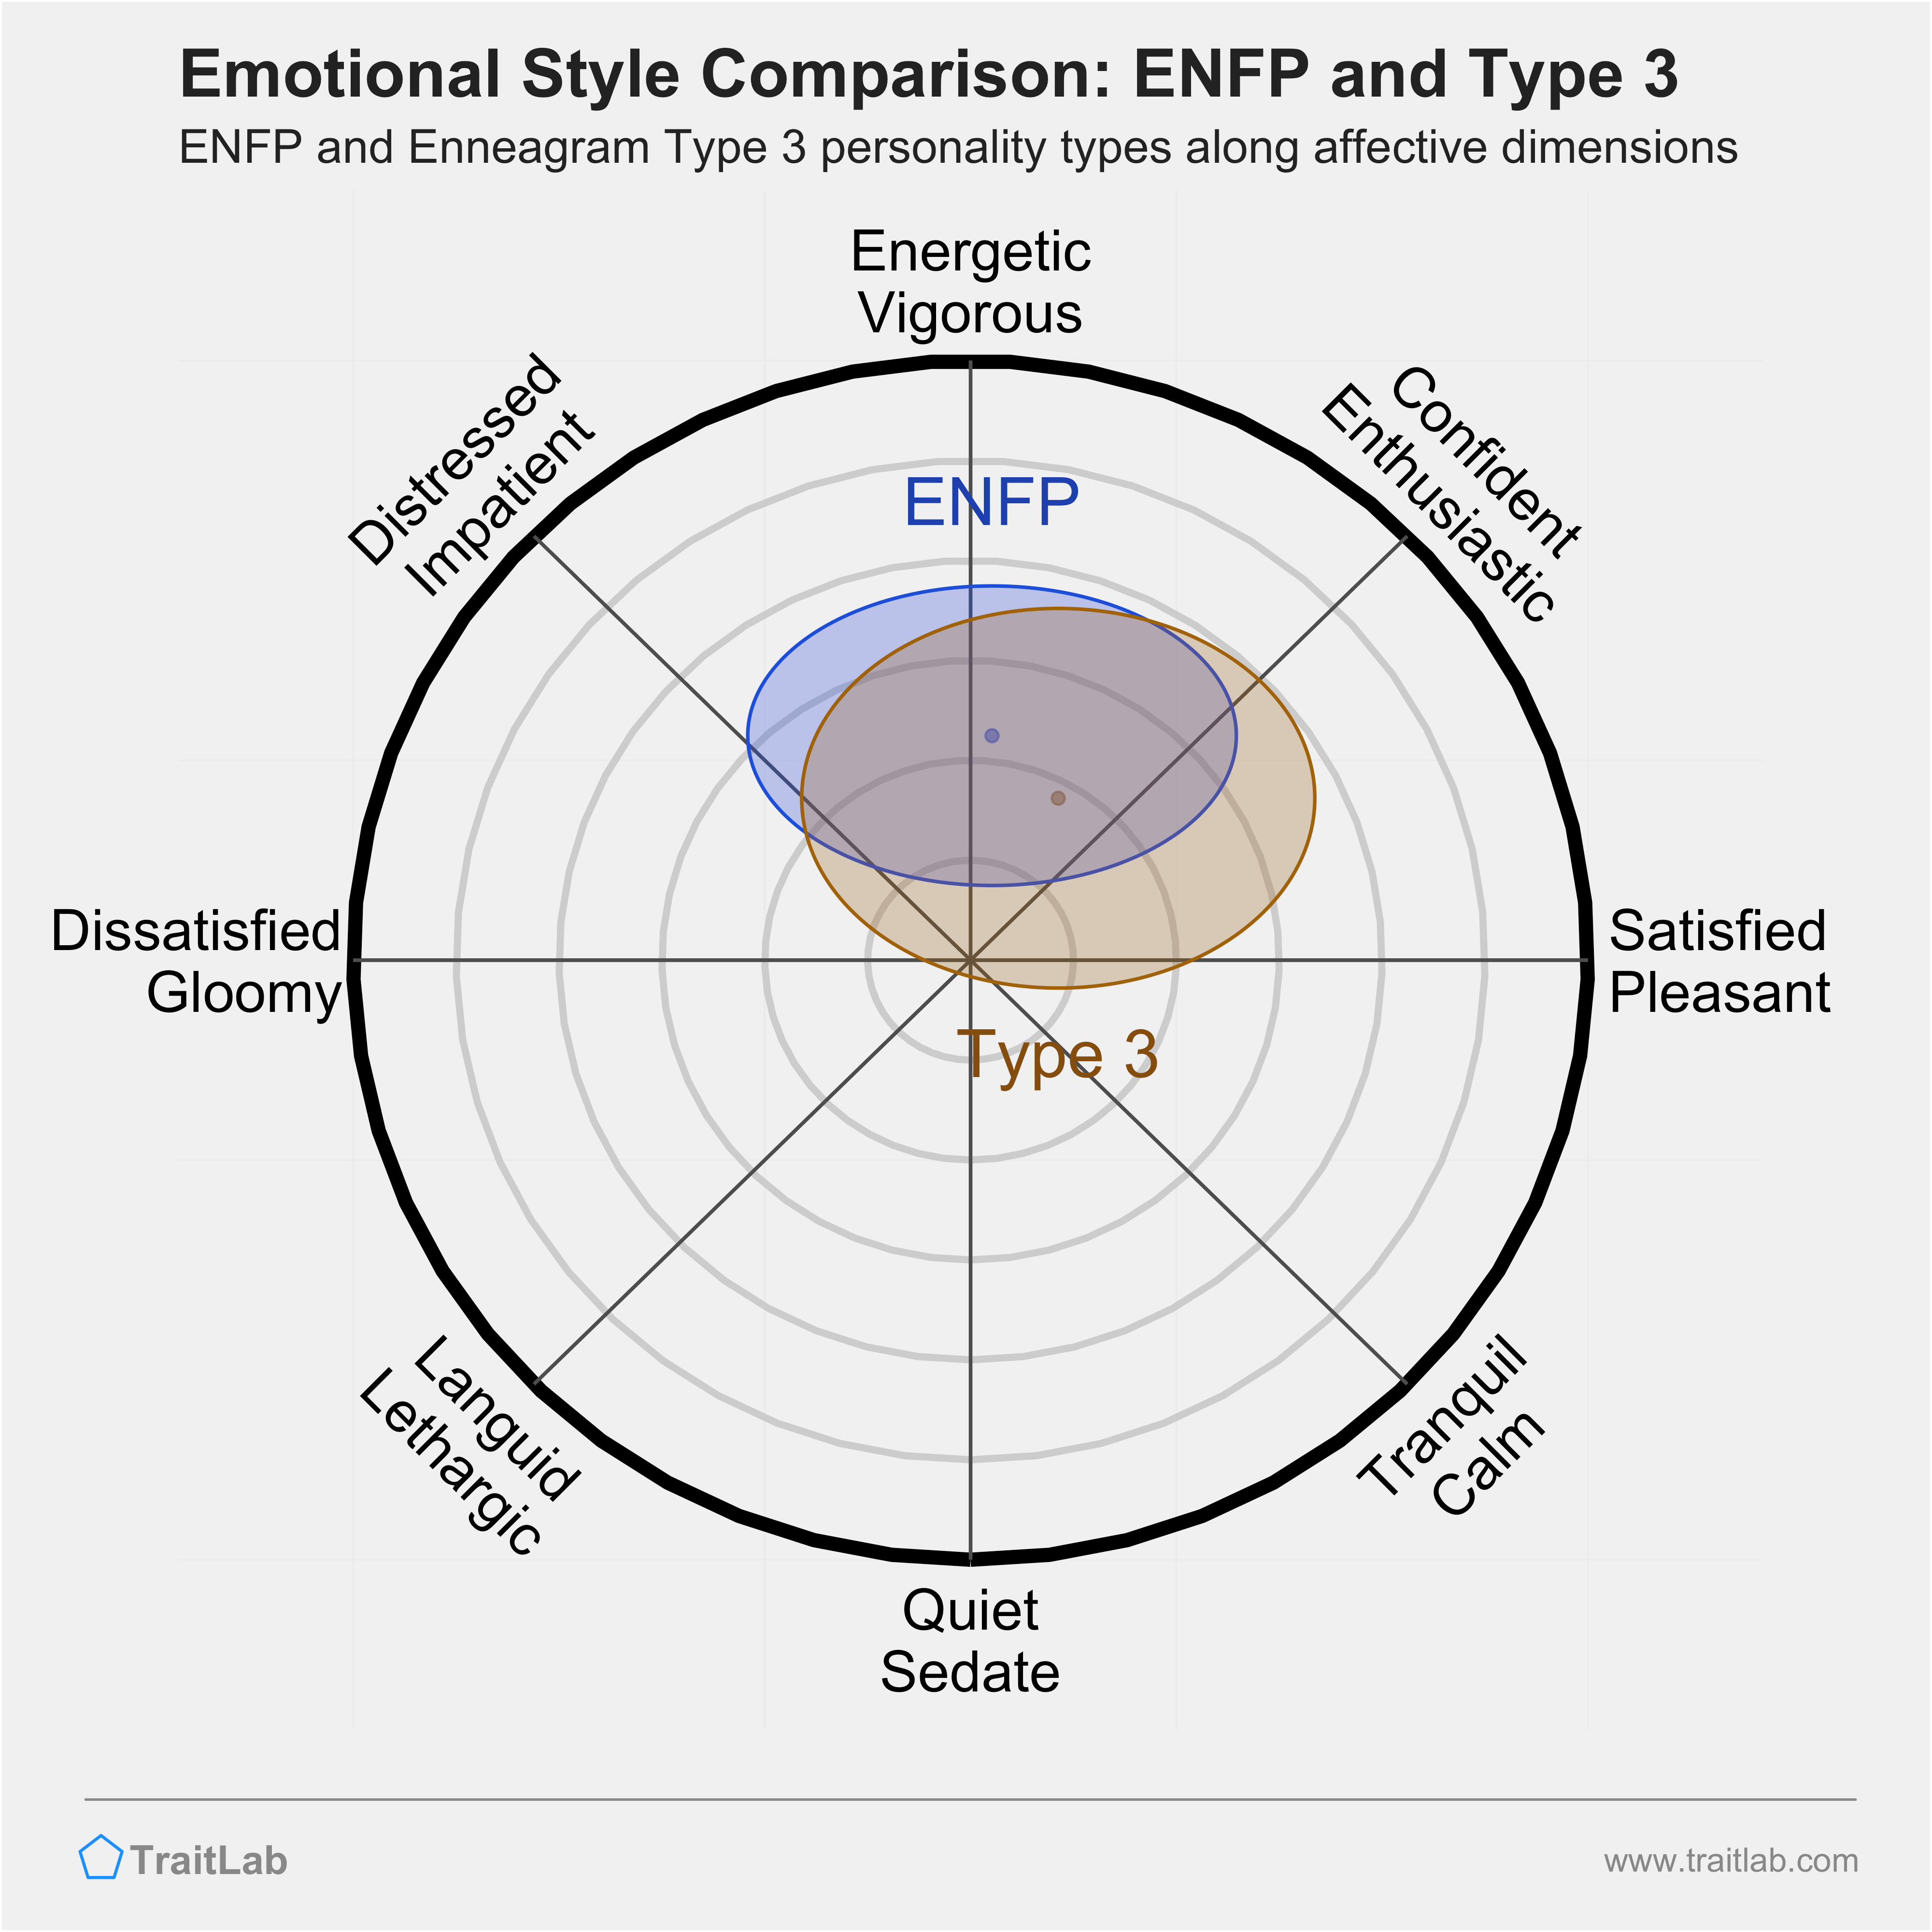 ENFP and Type 3 comparison across emotional (affective) dimensions